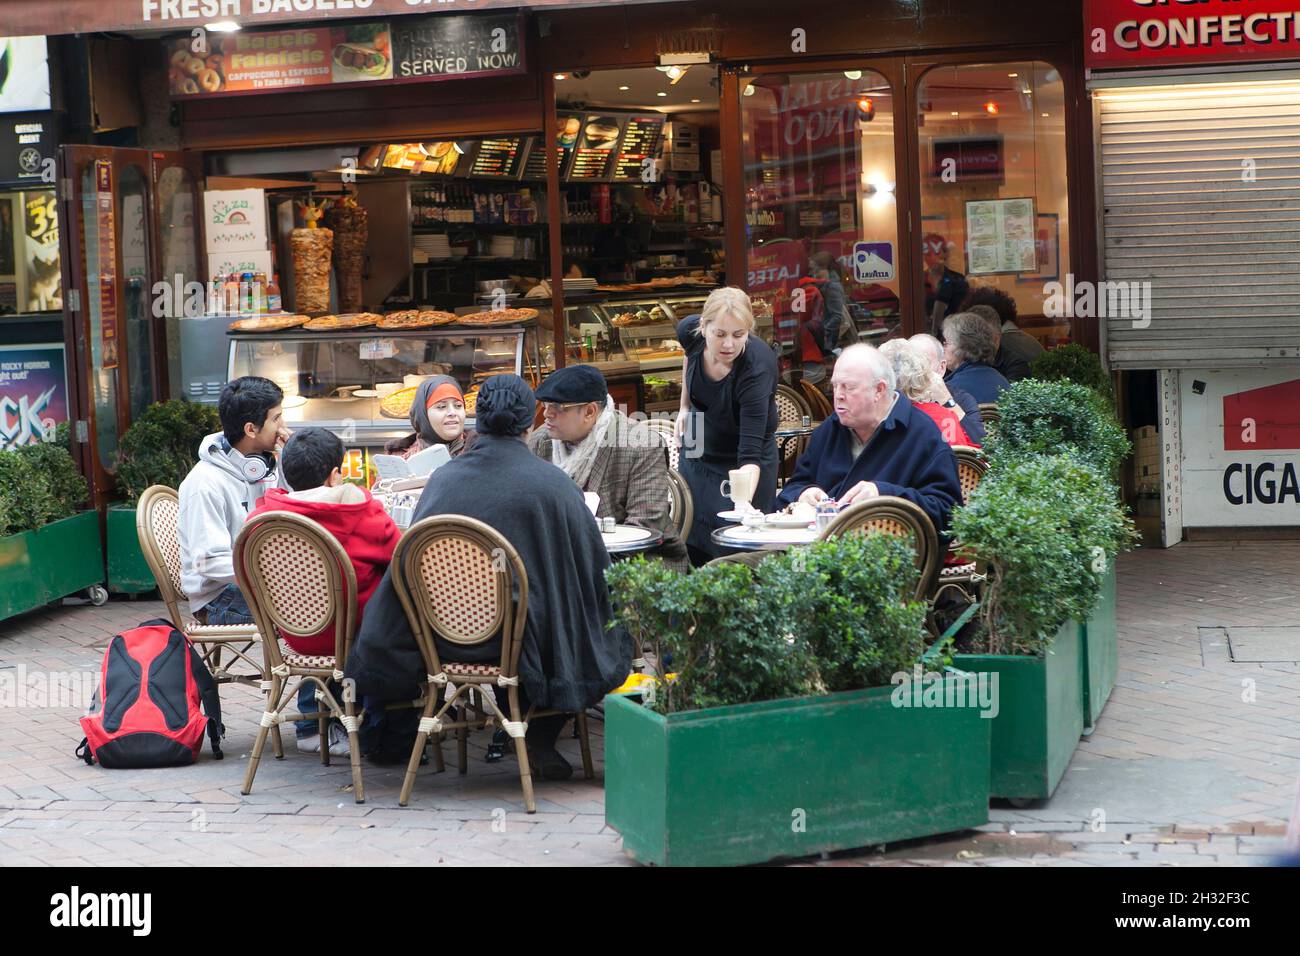 London, UK - 20 September 2021, People are in cafe. Big family orders pizza at a cafe in Leicester Square Stock Photo